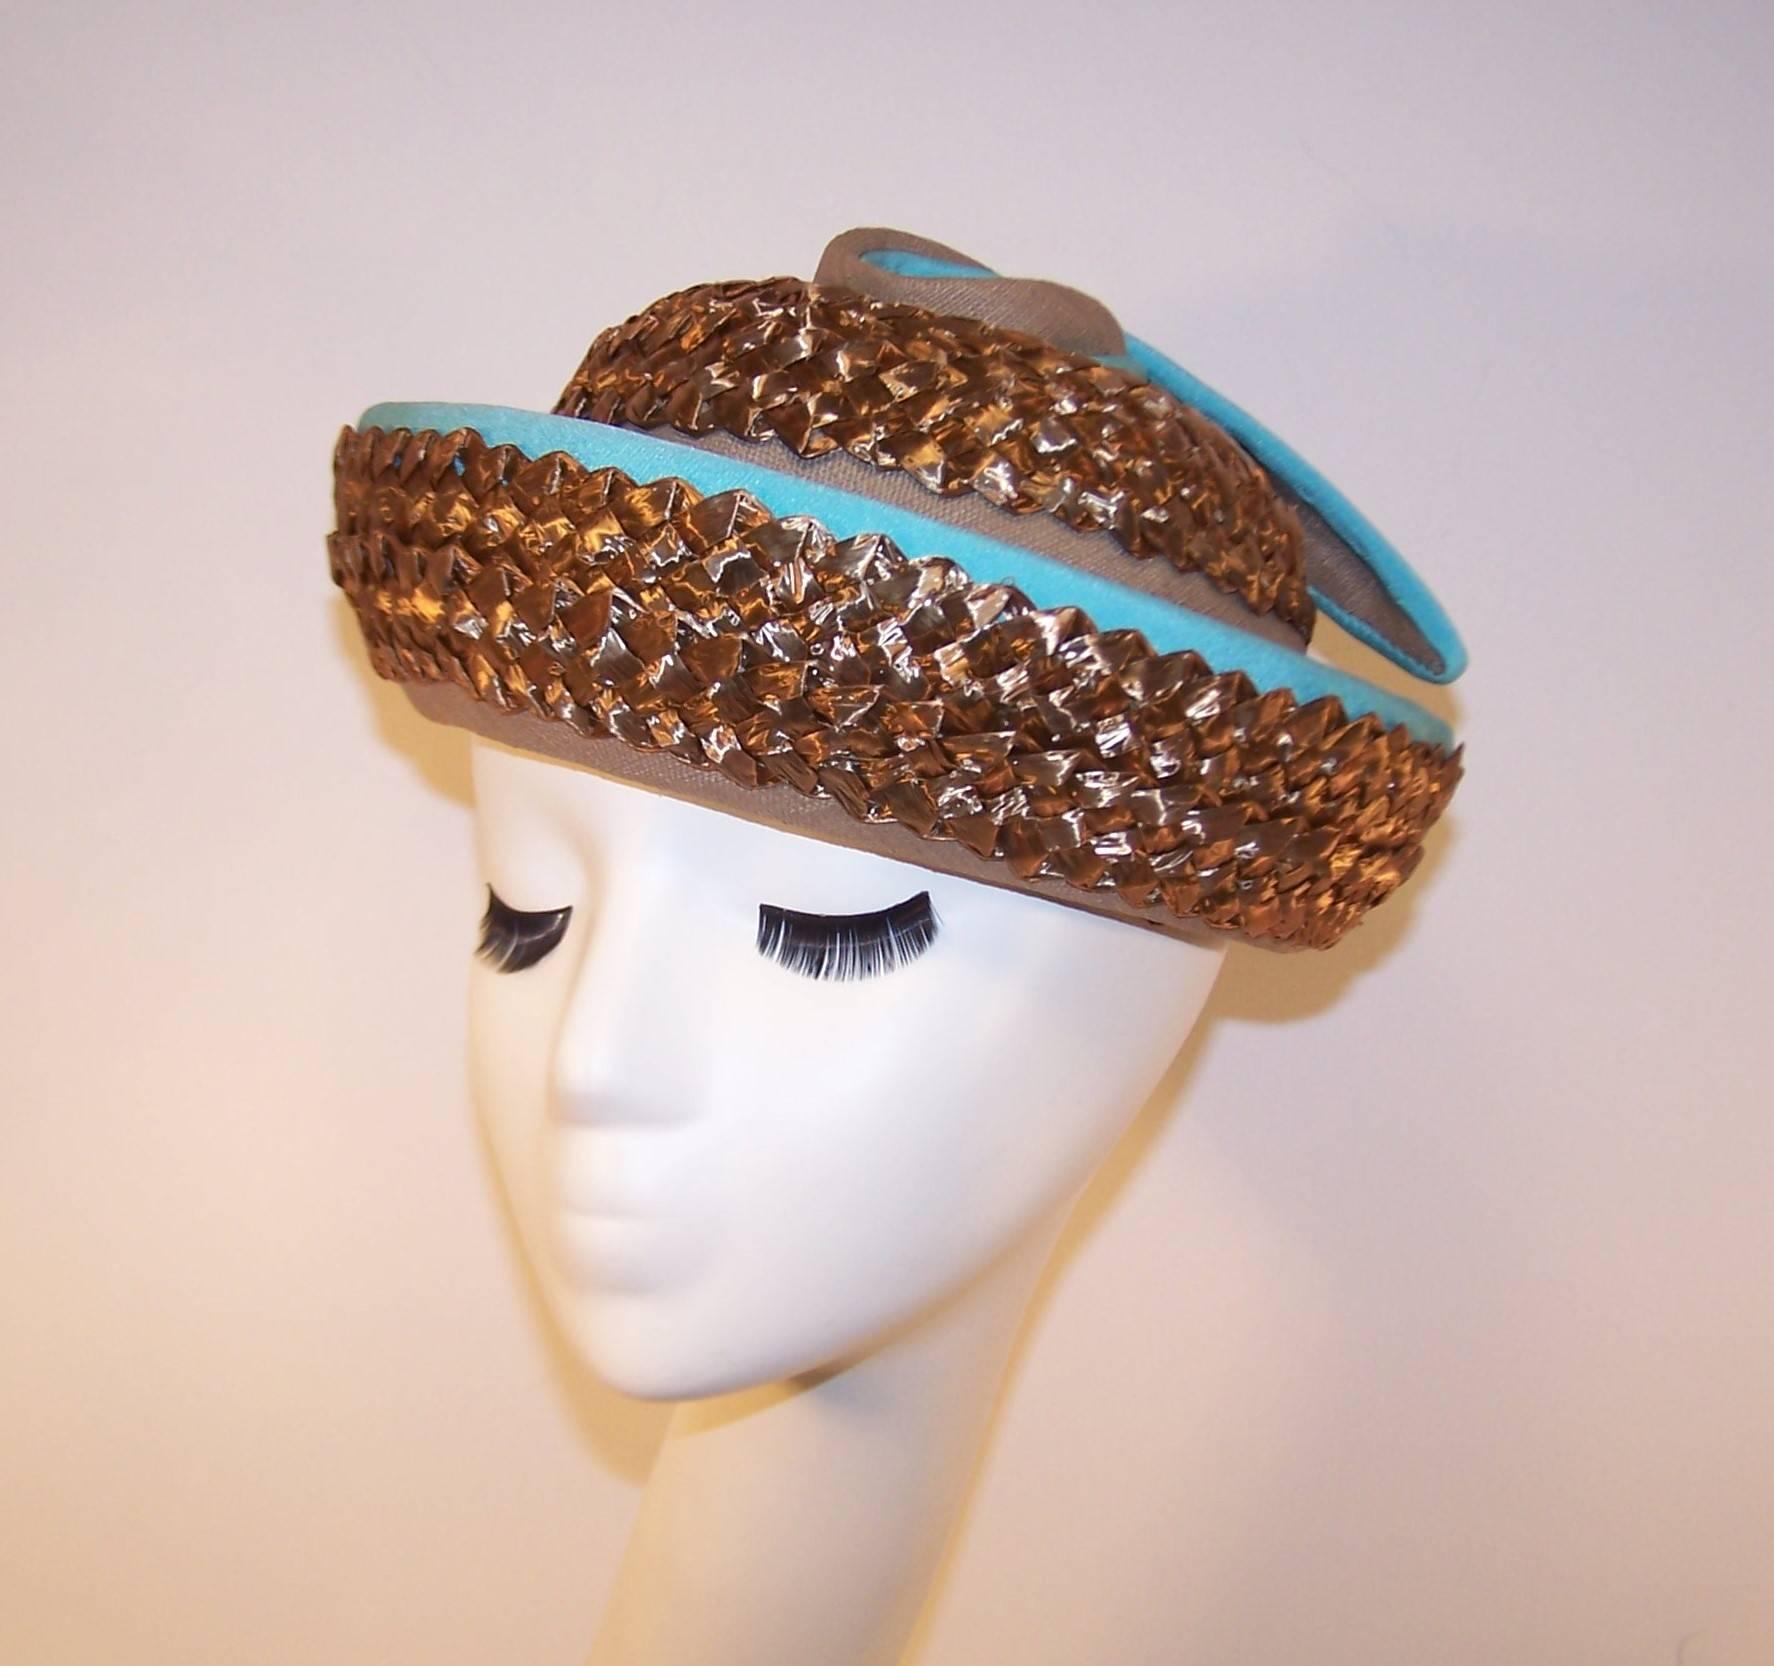 Green Bonta Creatrice Brown Linen & Straw Hat With Turquoise Details, 1960’s For Sale